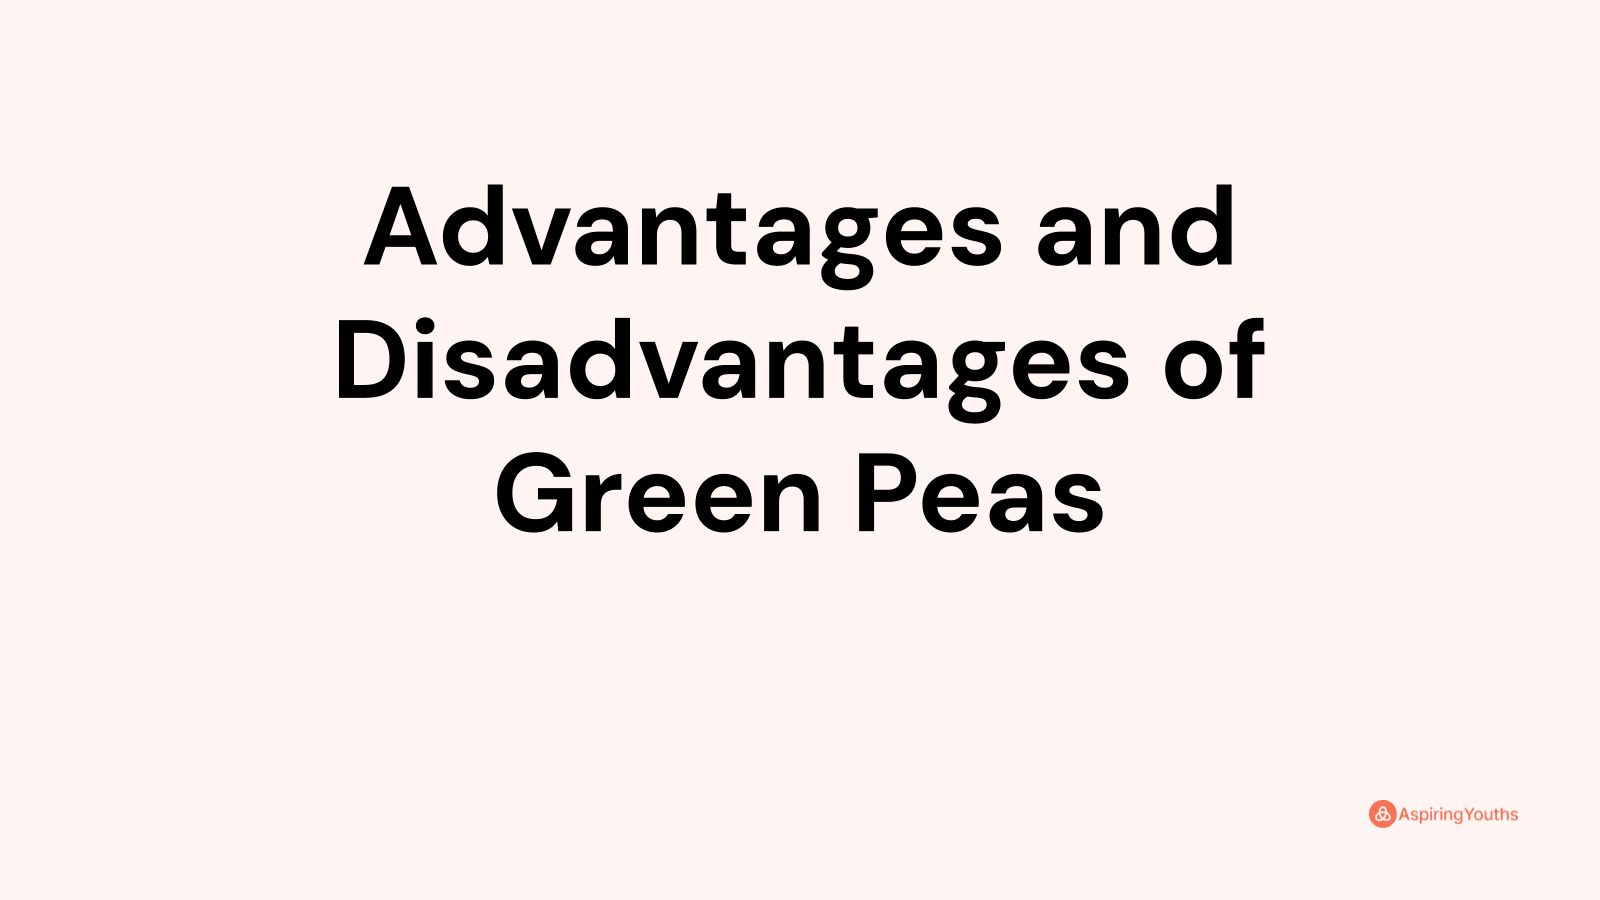 Advantages and Disadvantages of Green Peas